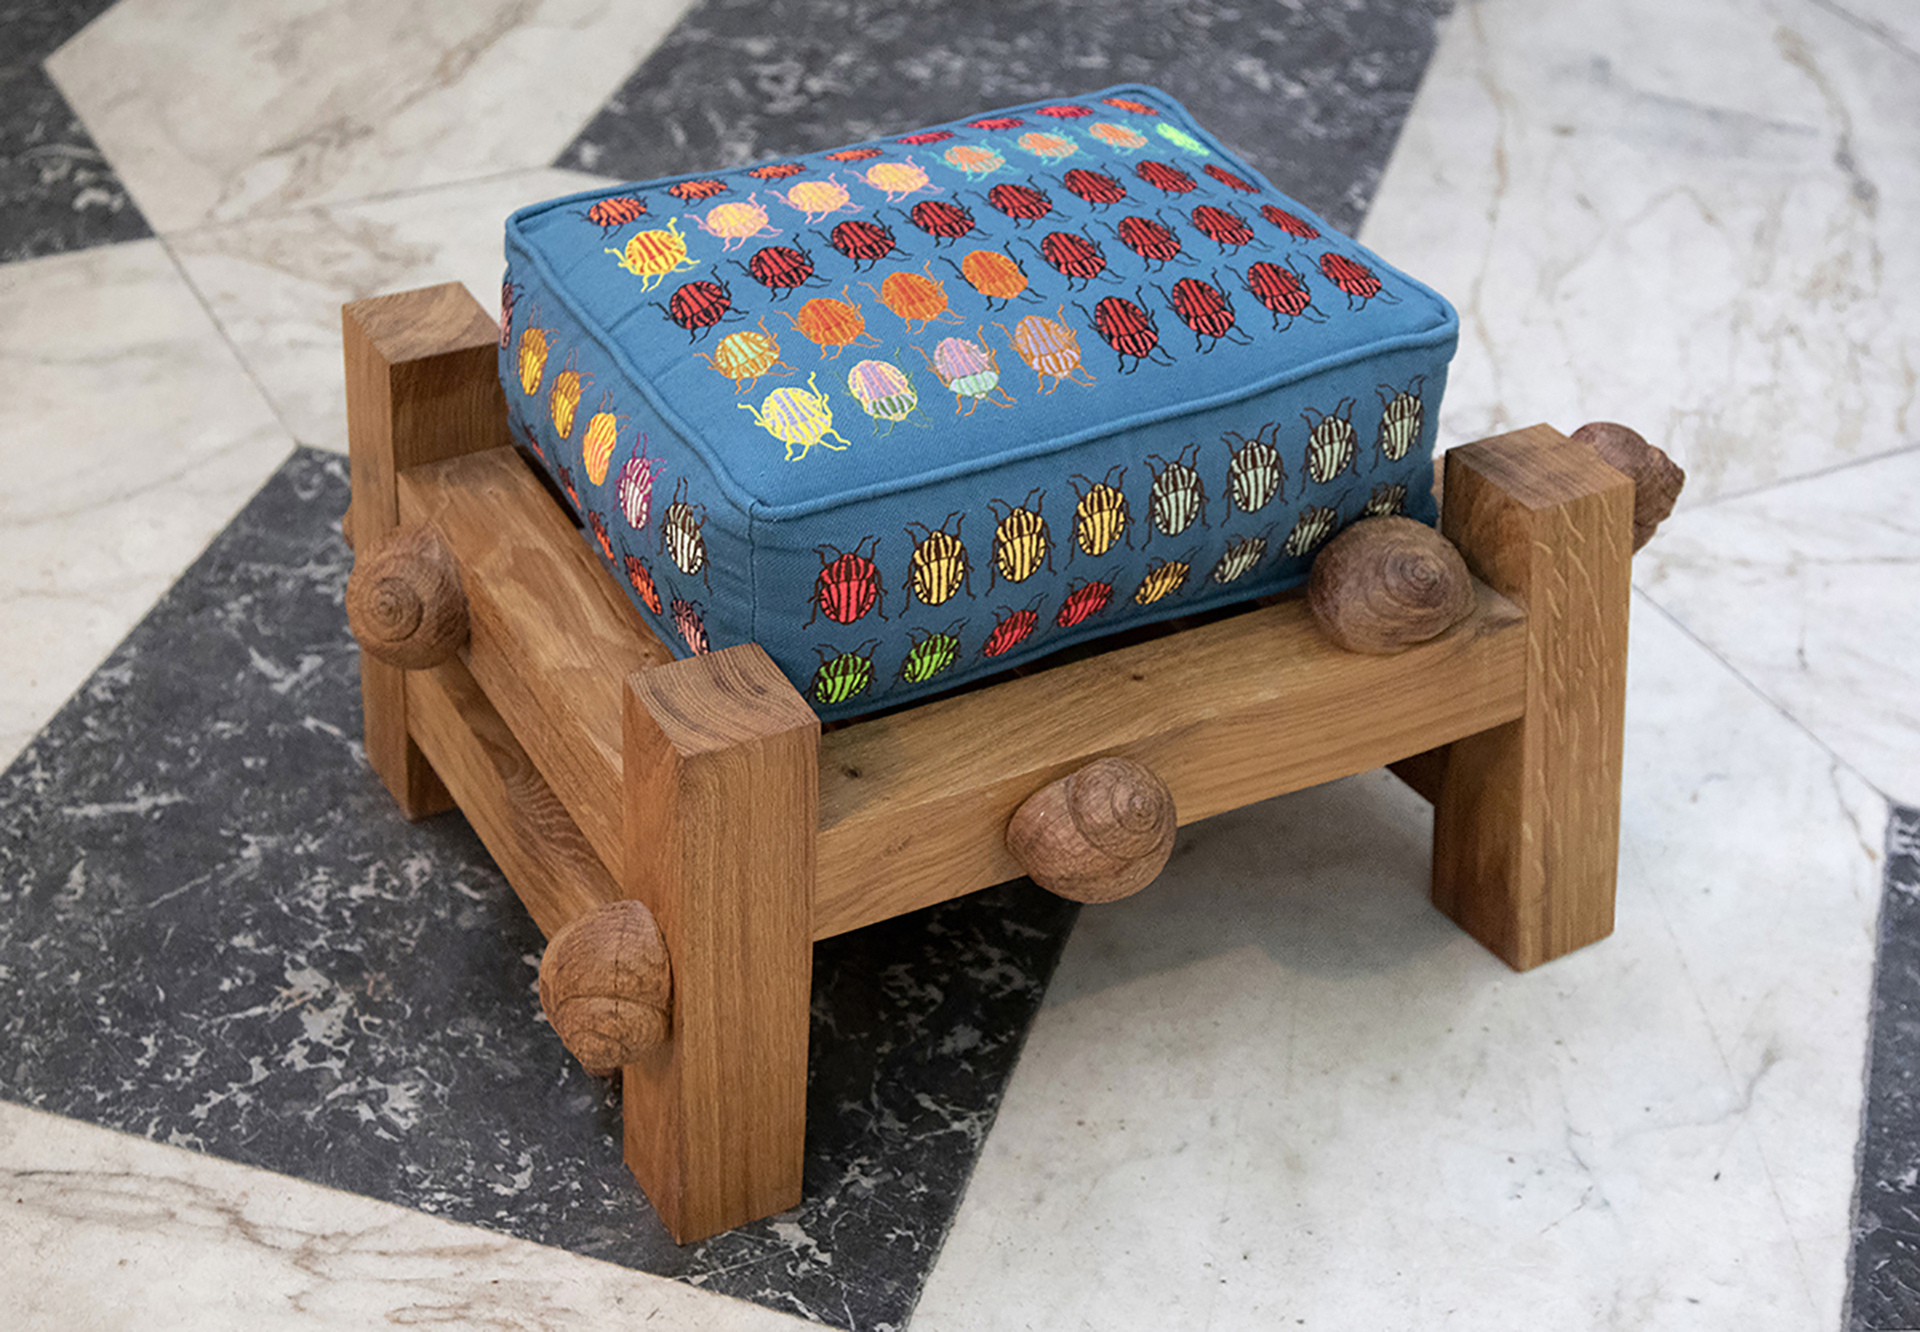 Daniel Dewar &amp; Grégory Gicquel, Oak bench with striped shield bugs and snails, 2021, oak wood and embroidery on cushion, 41 x 66 x 56 cm